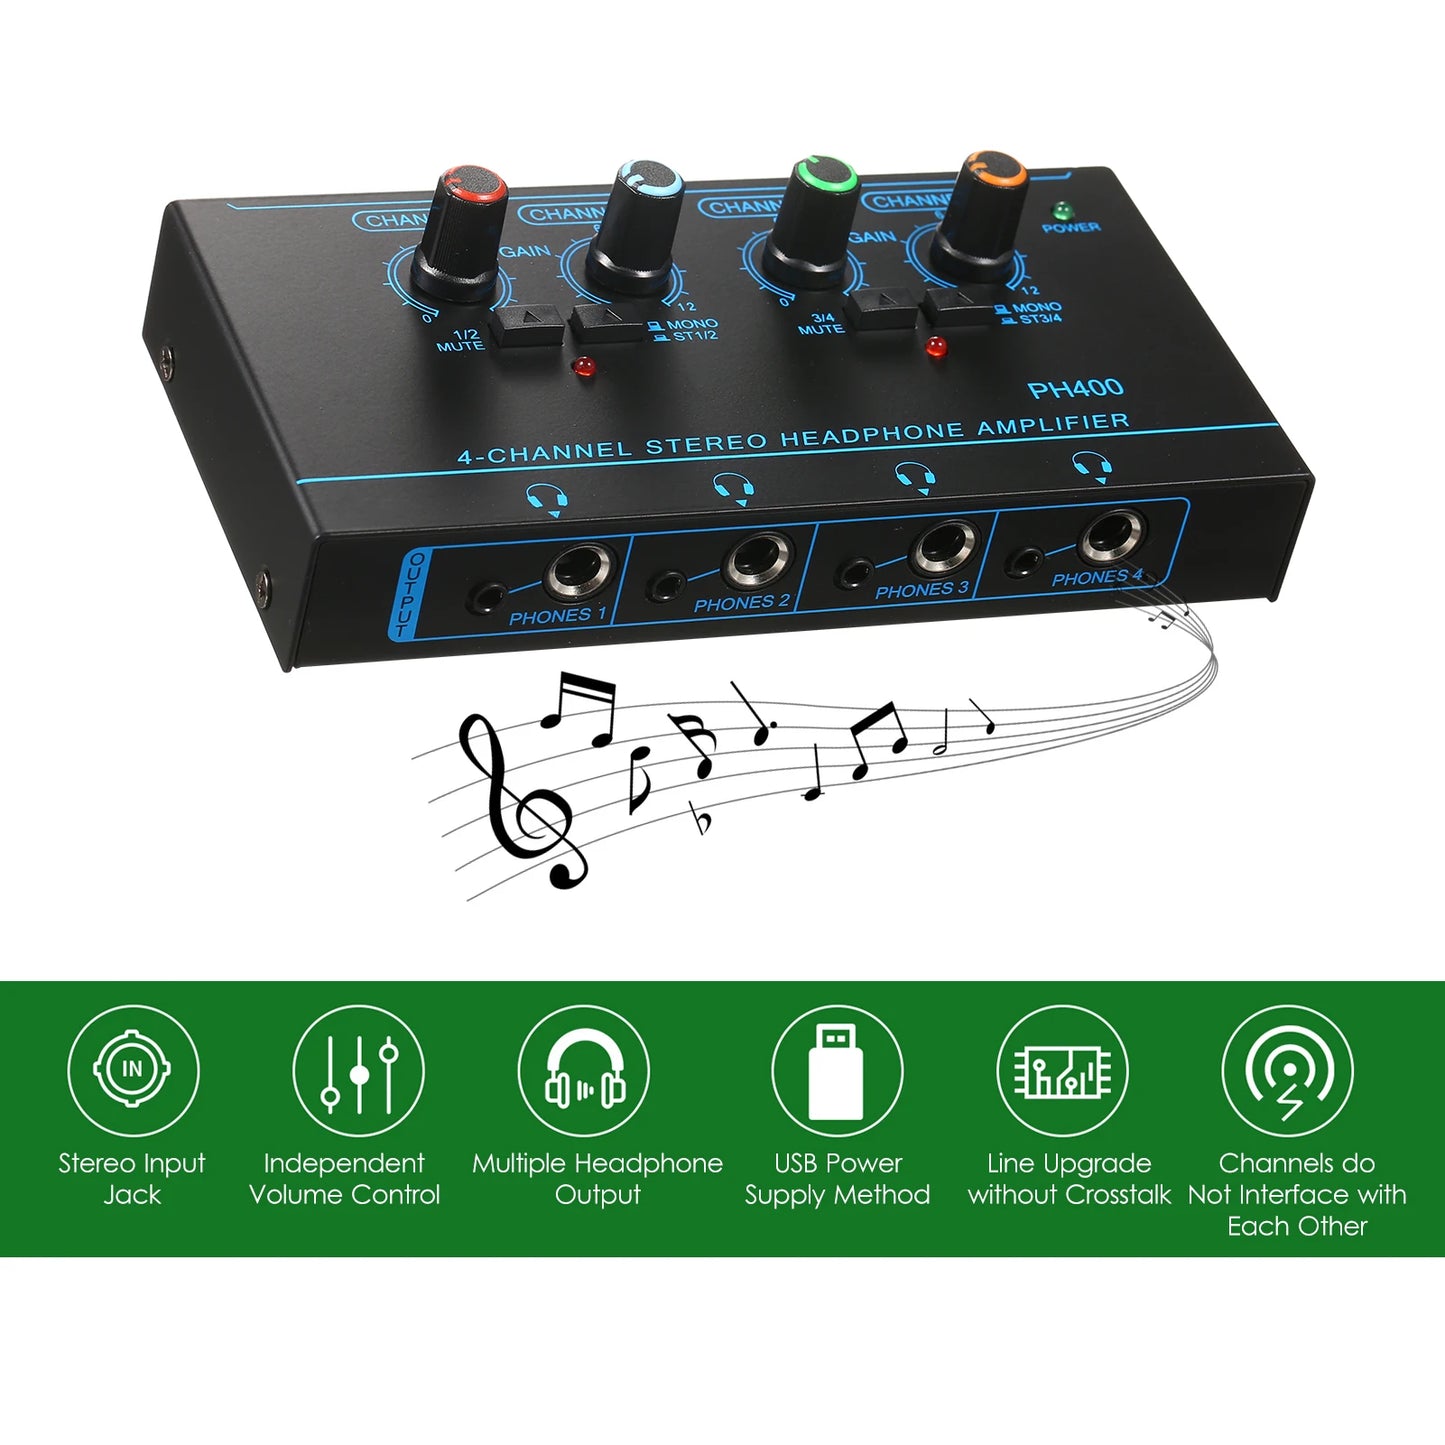 6-Channel Stereo Headphone Amplifier Compact Mini Audio Stereo